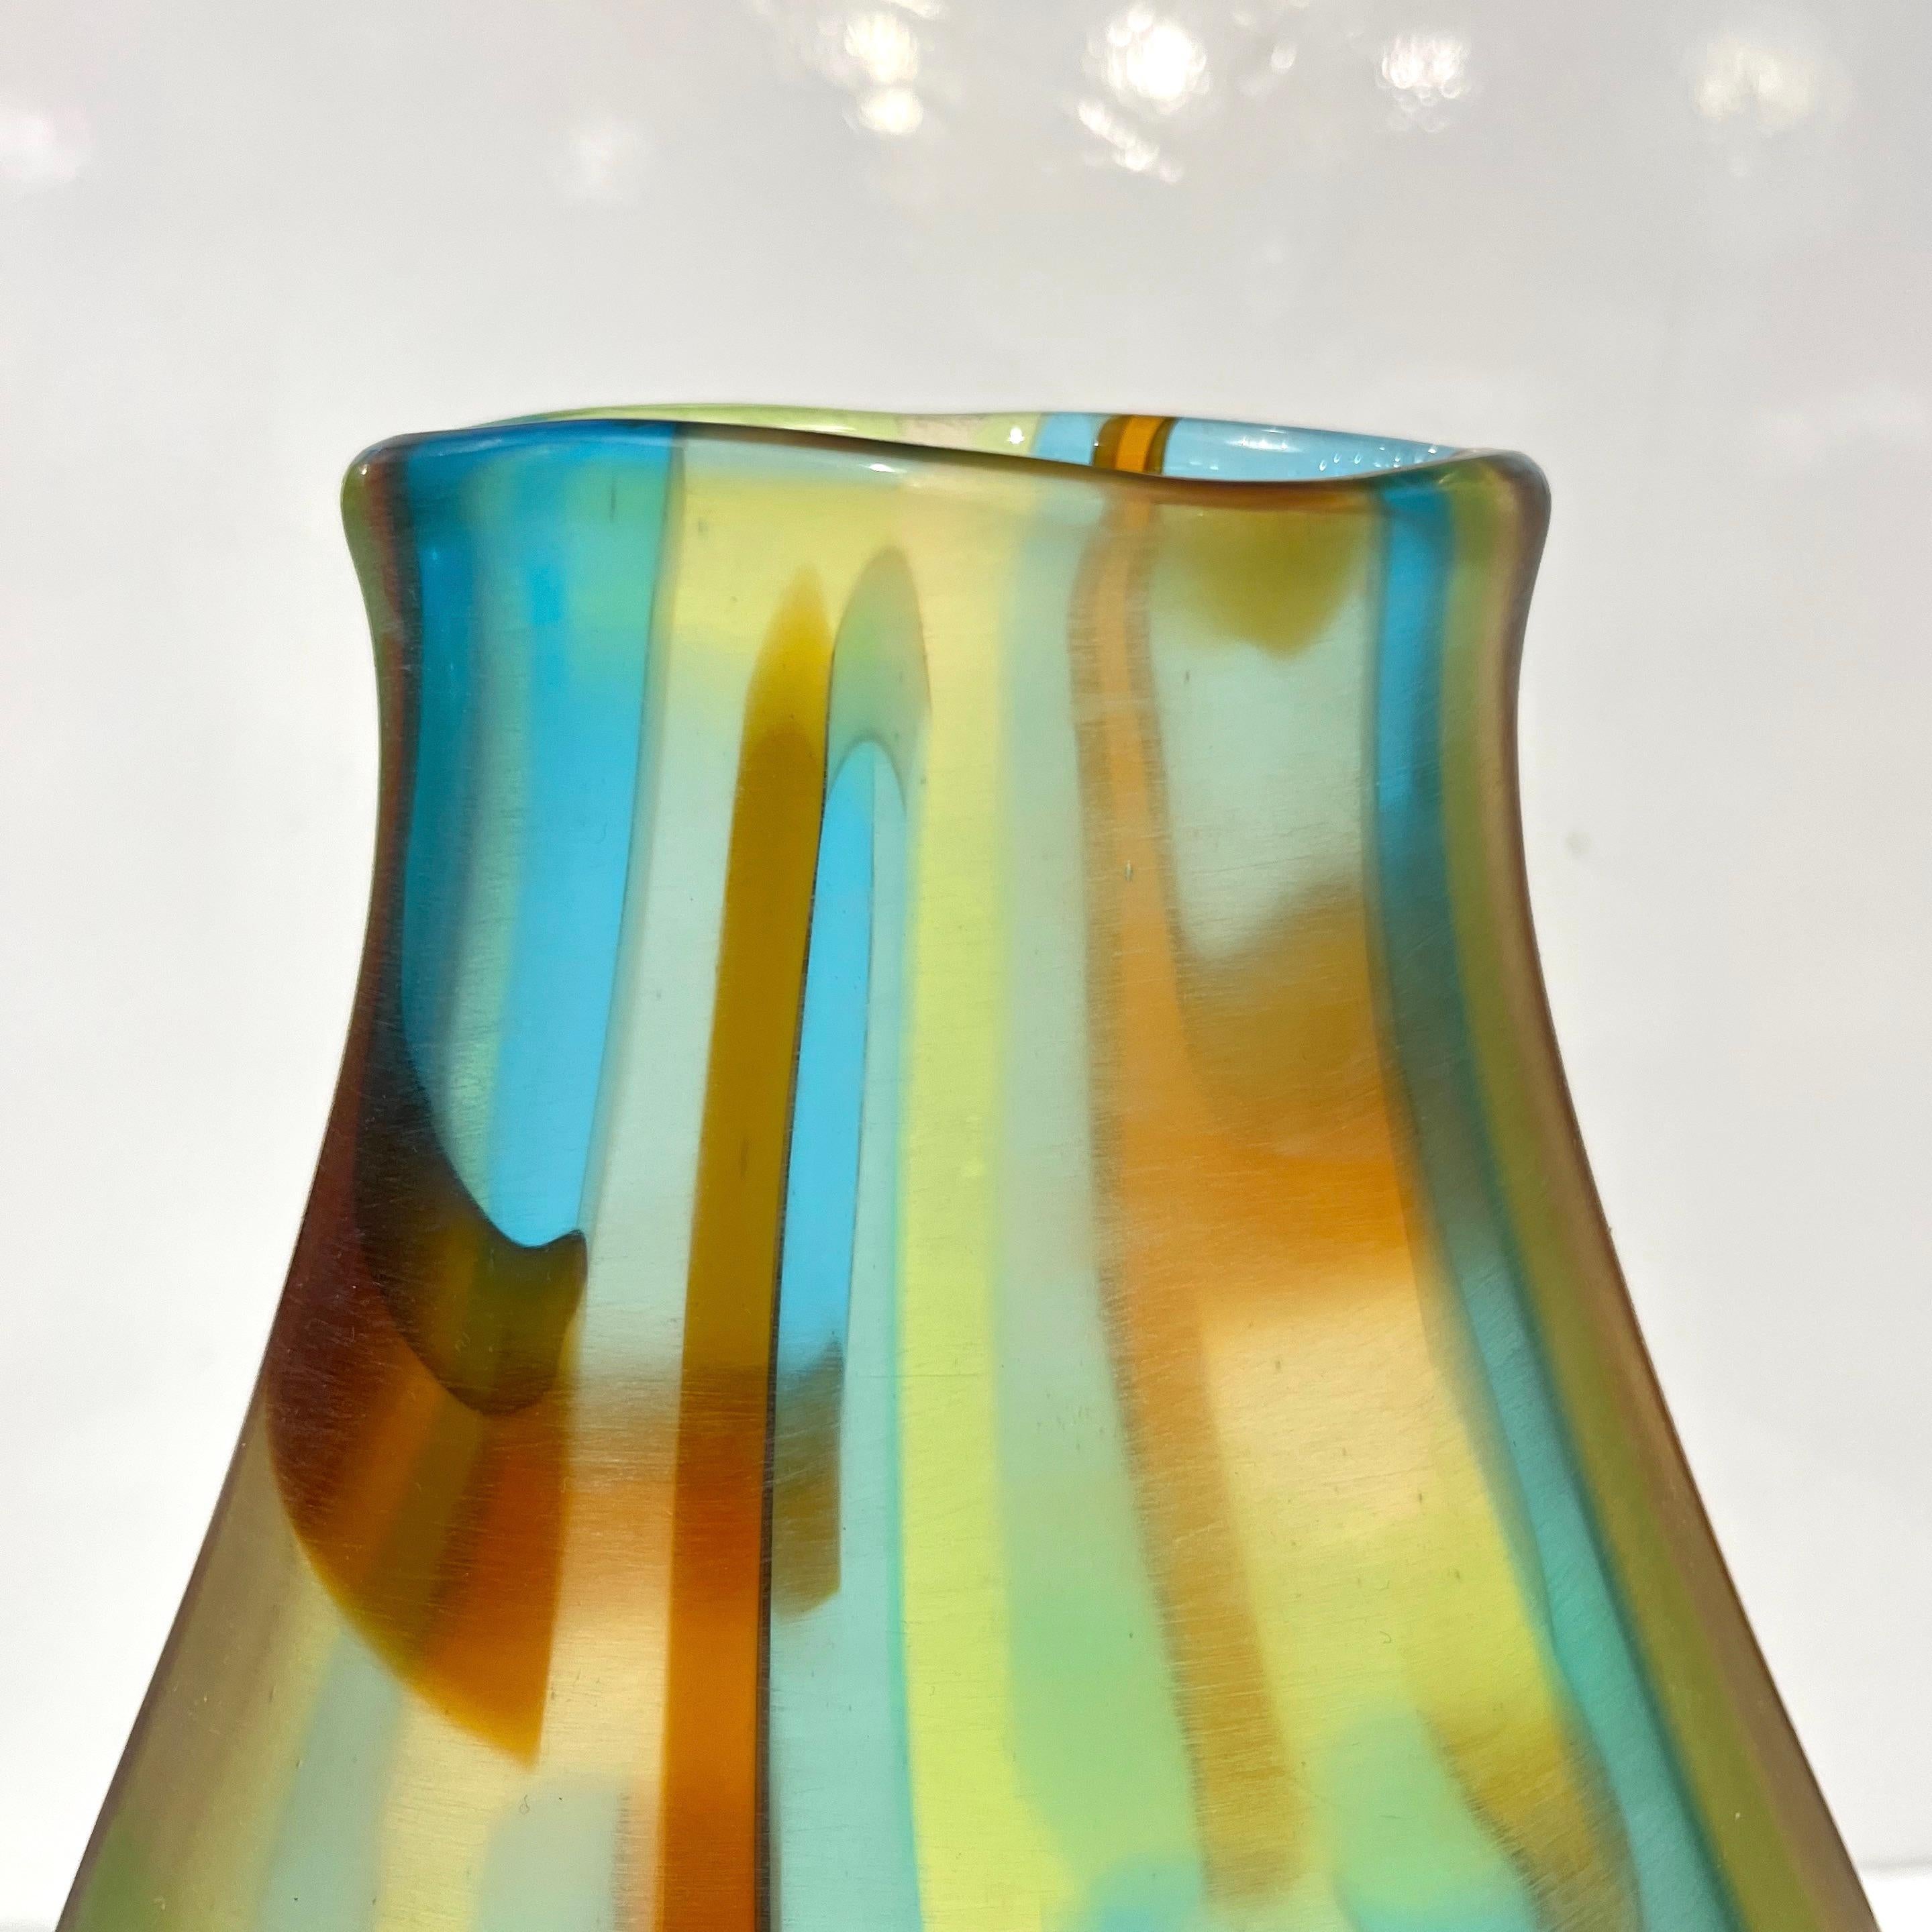 Afro Celotto Early 2000s Italian Turquoise Yellow Green Amber Murano Glass Vase For Sale 4